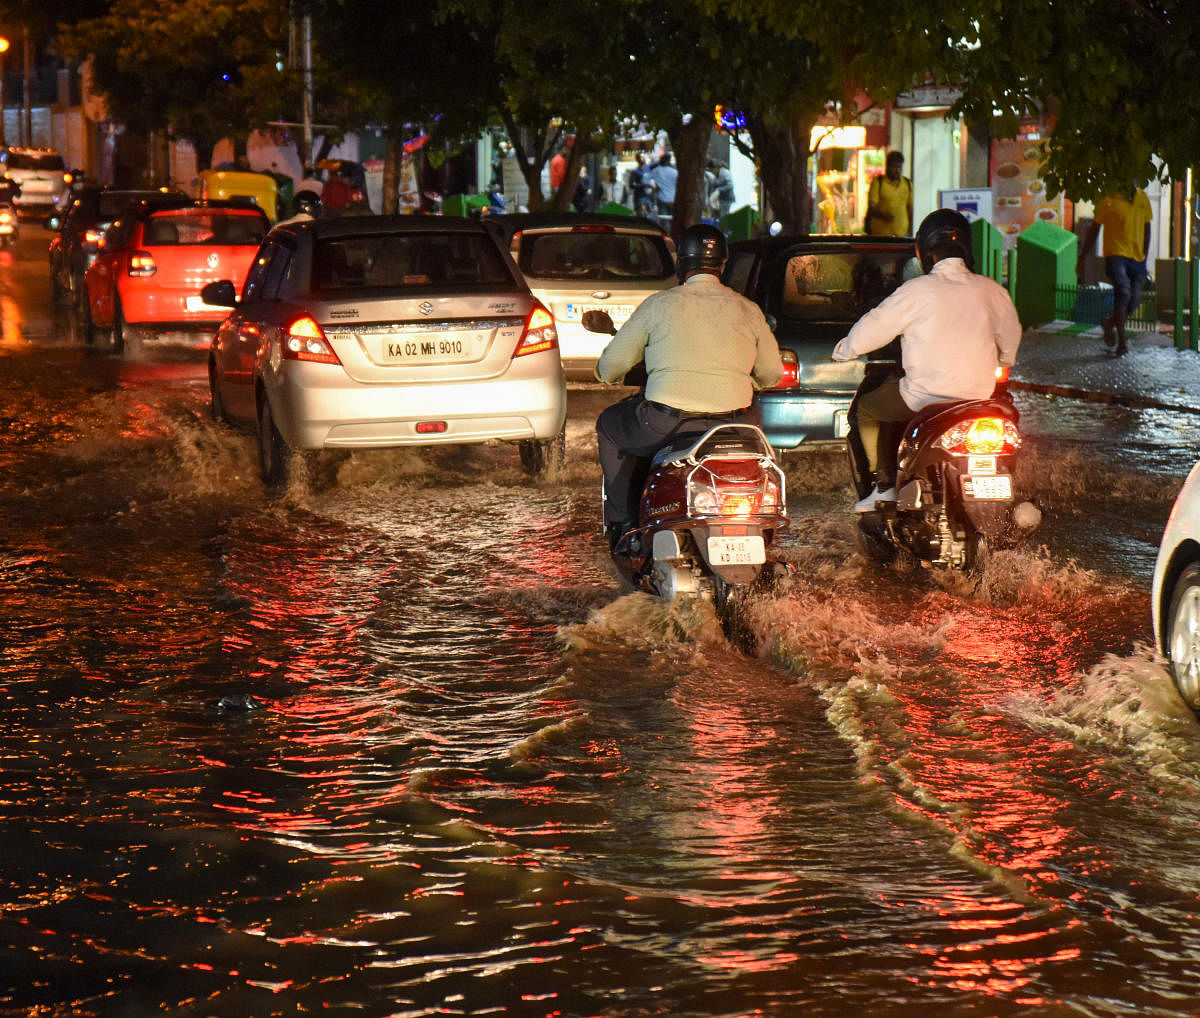 Inundated roads and underpasses left motorists and pedestrians in knee-deep waters. Traffic snarls on various roads were commonplace.